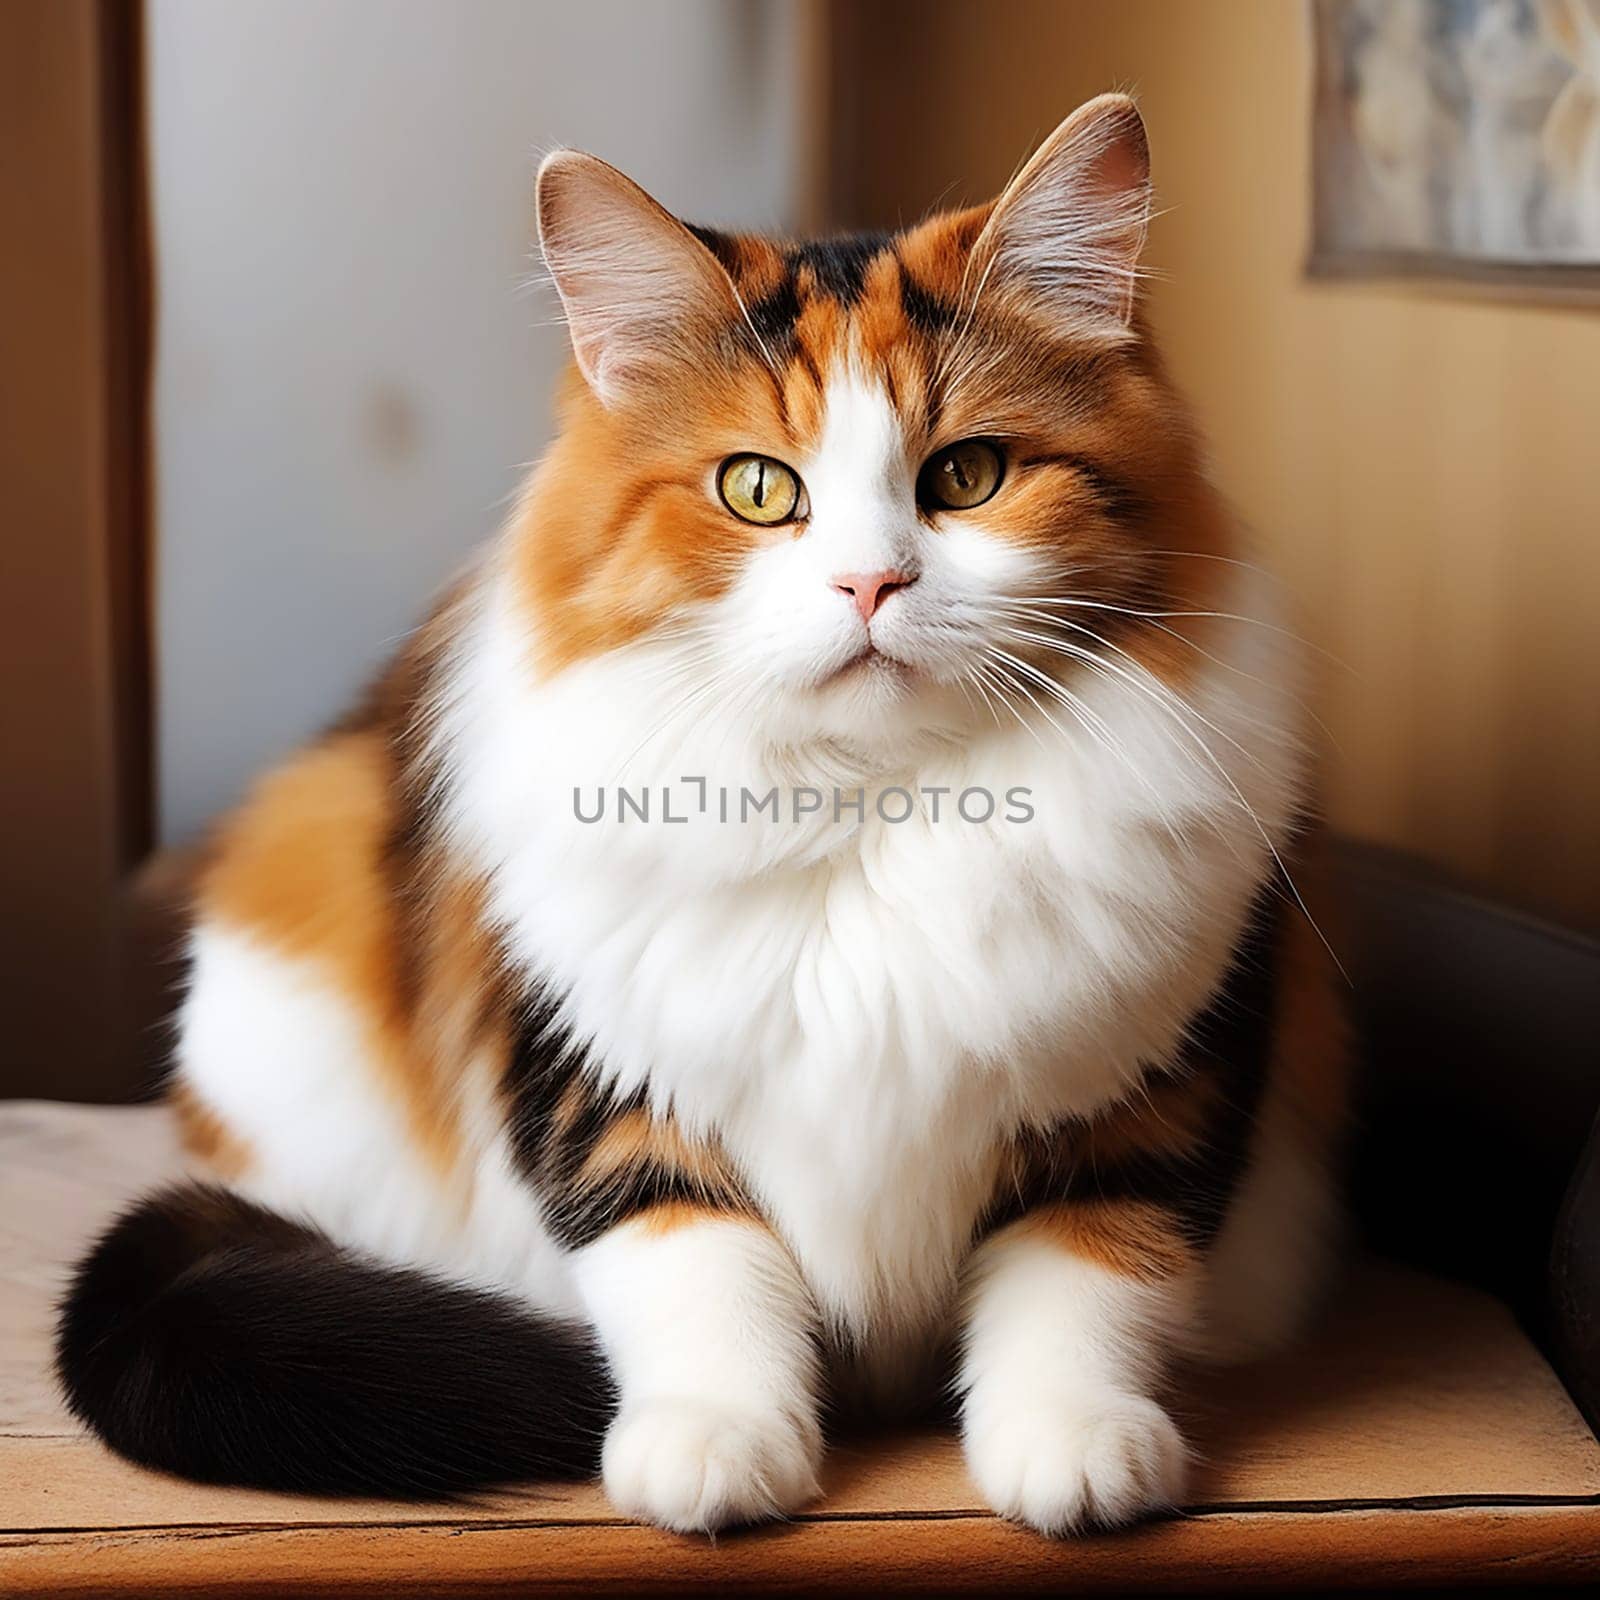 The Quirky Appeal of a Fat Calico Cat